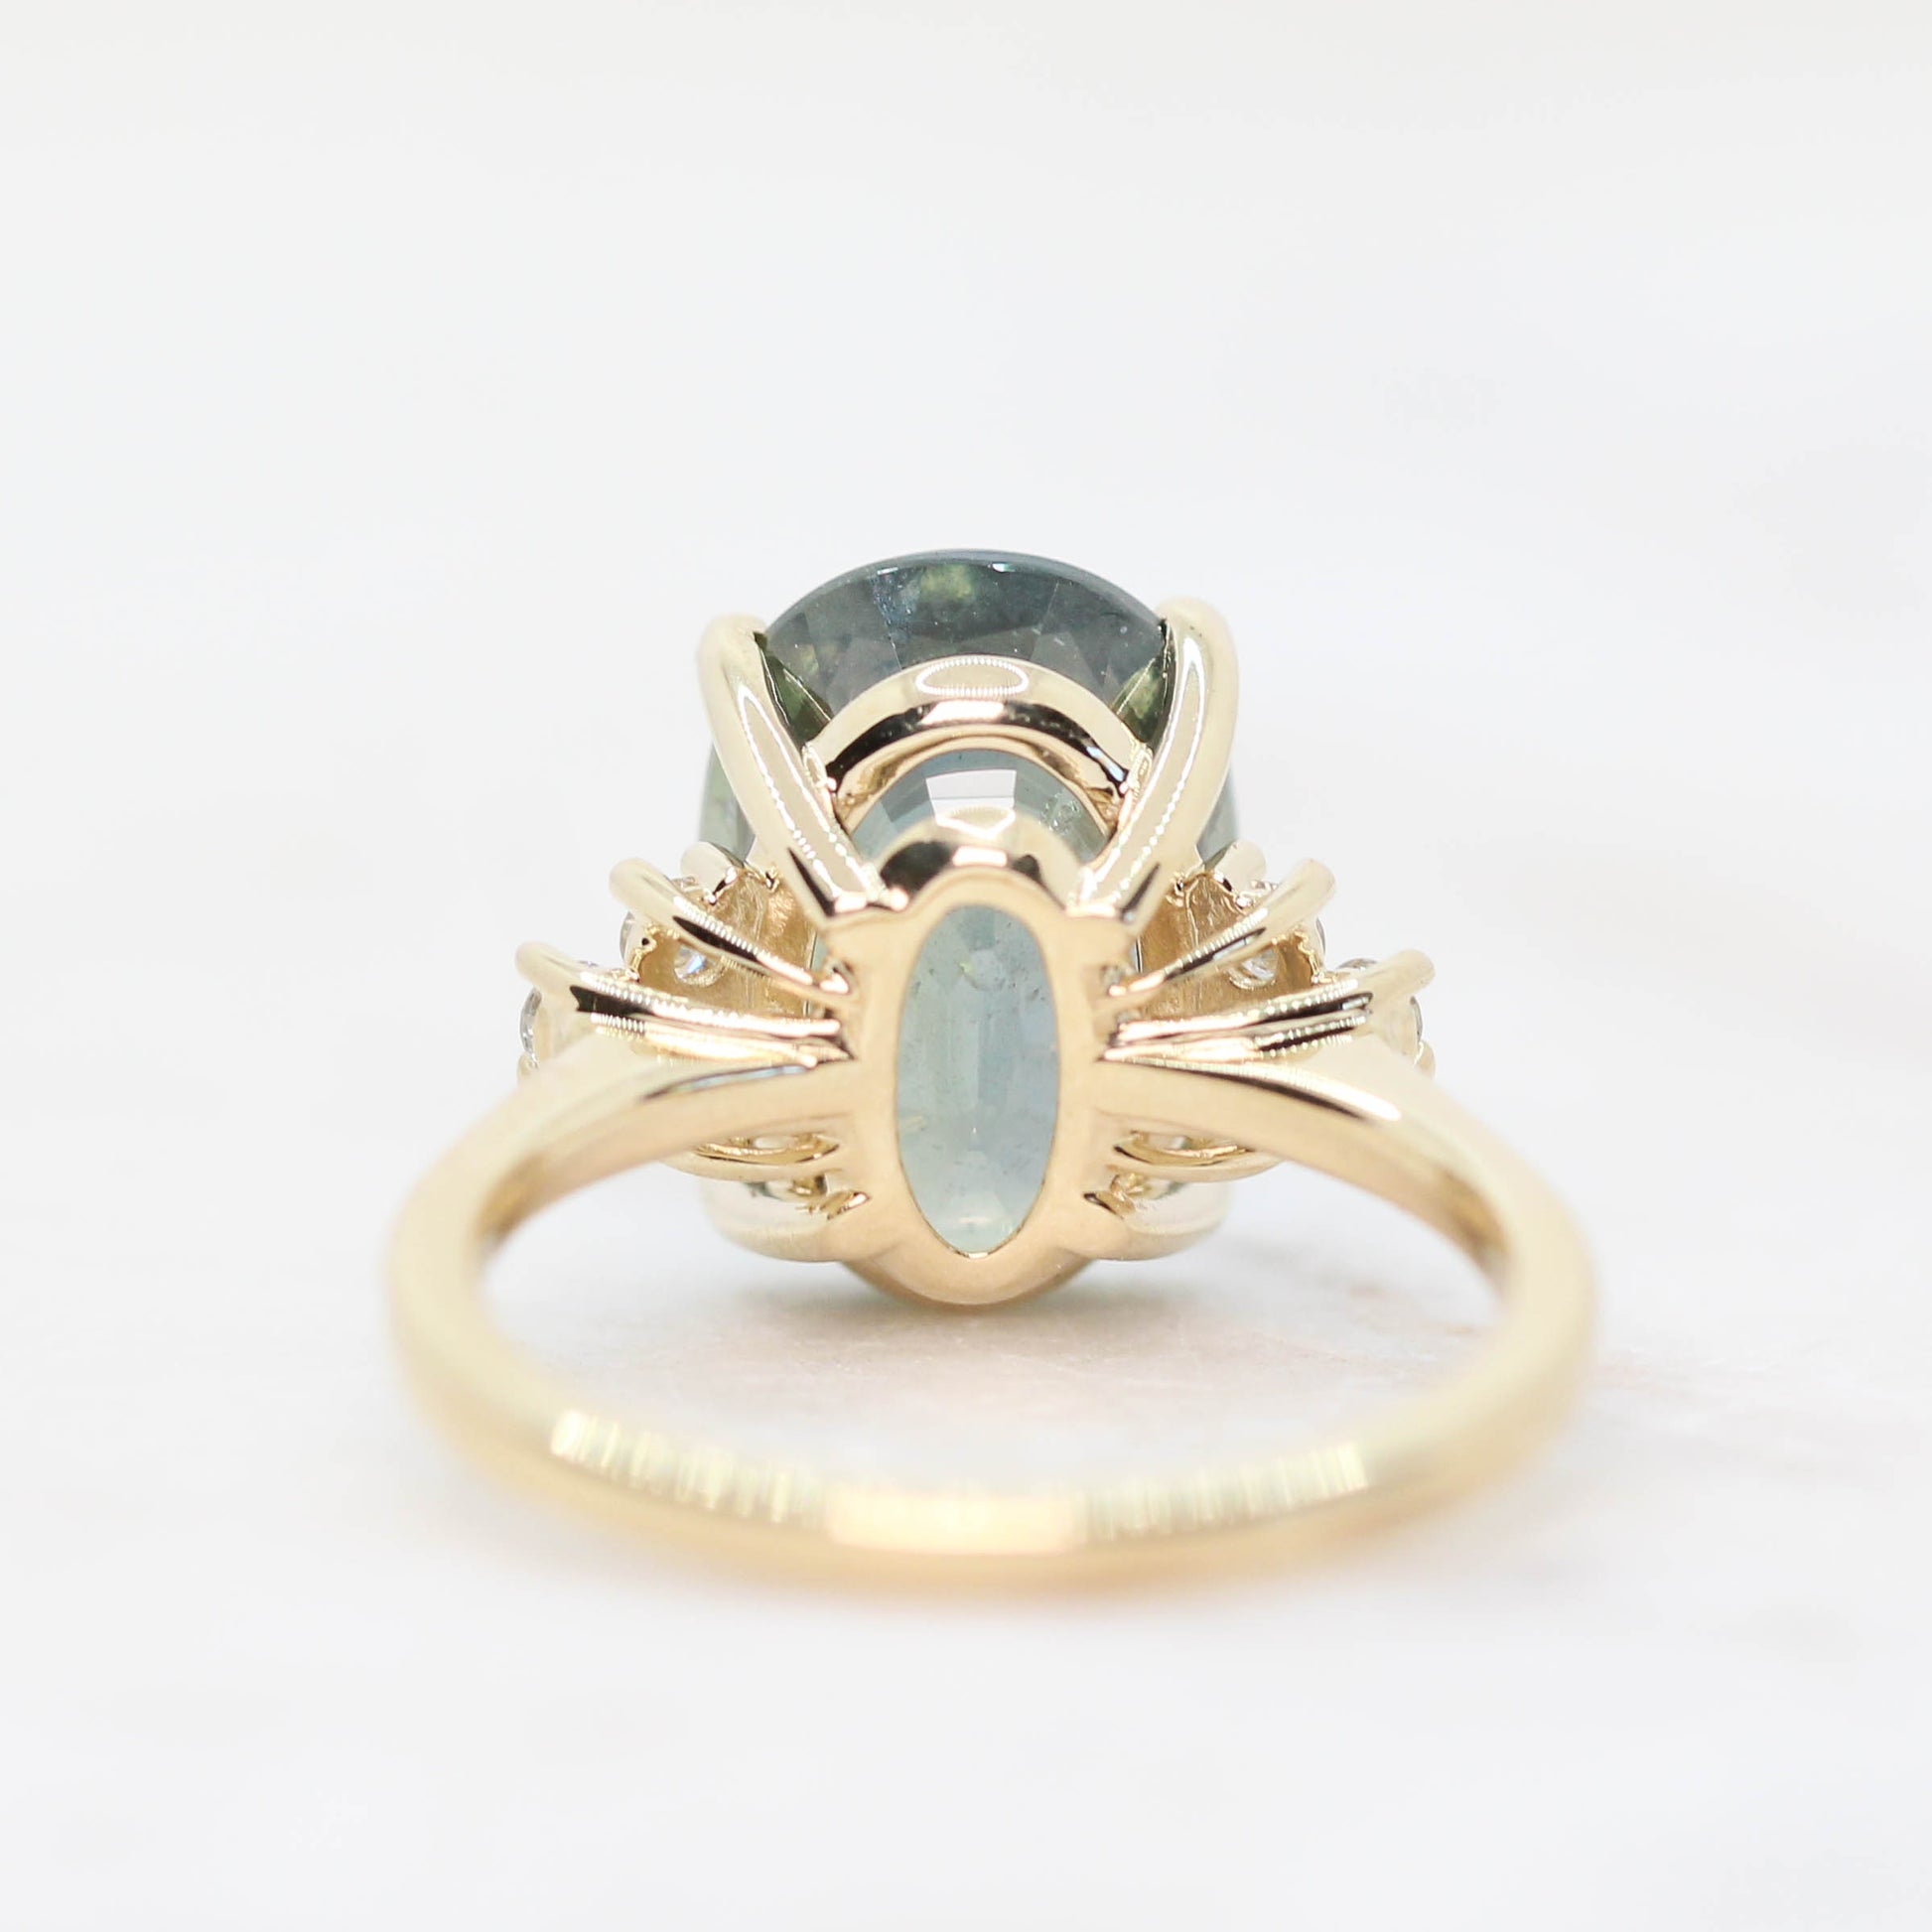 Veragene Ring with a 10.48 Carat Blue Green Oval Sapphire and White Accent Diamonds in 14k Yellow Gold - Ready to Size and Ship - Midwinter Co. Alternative Bridal Rings and Modern Fine Jewelry